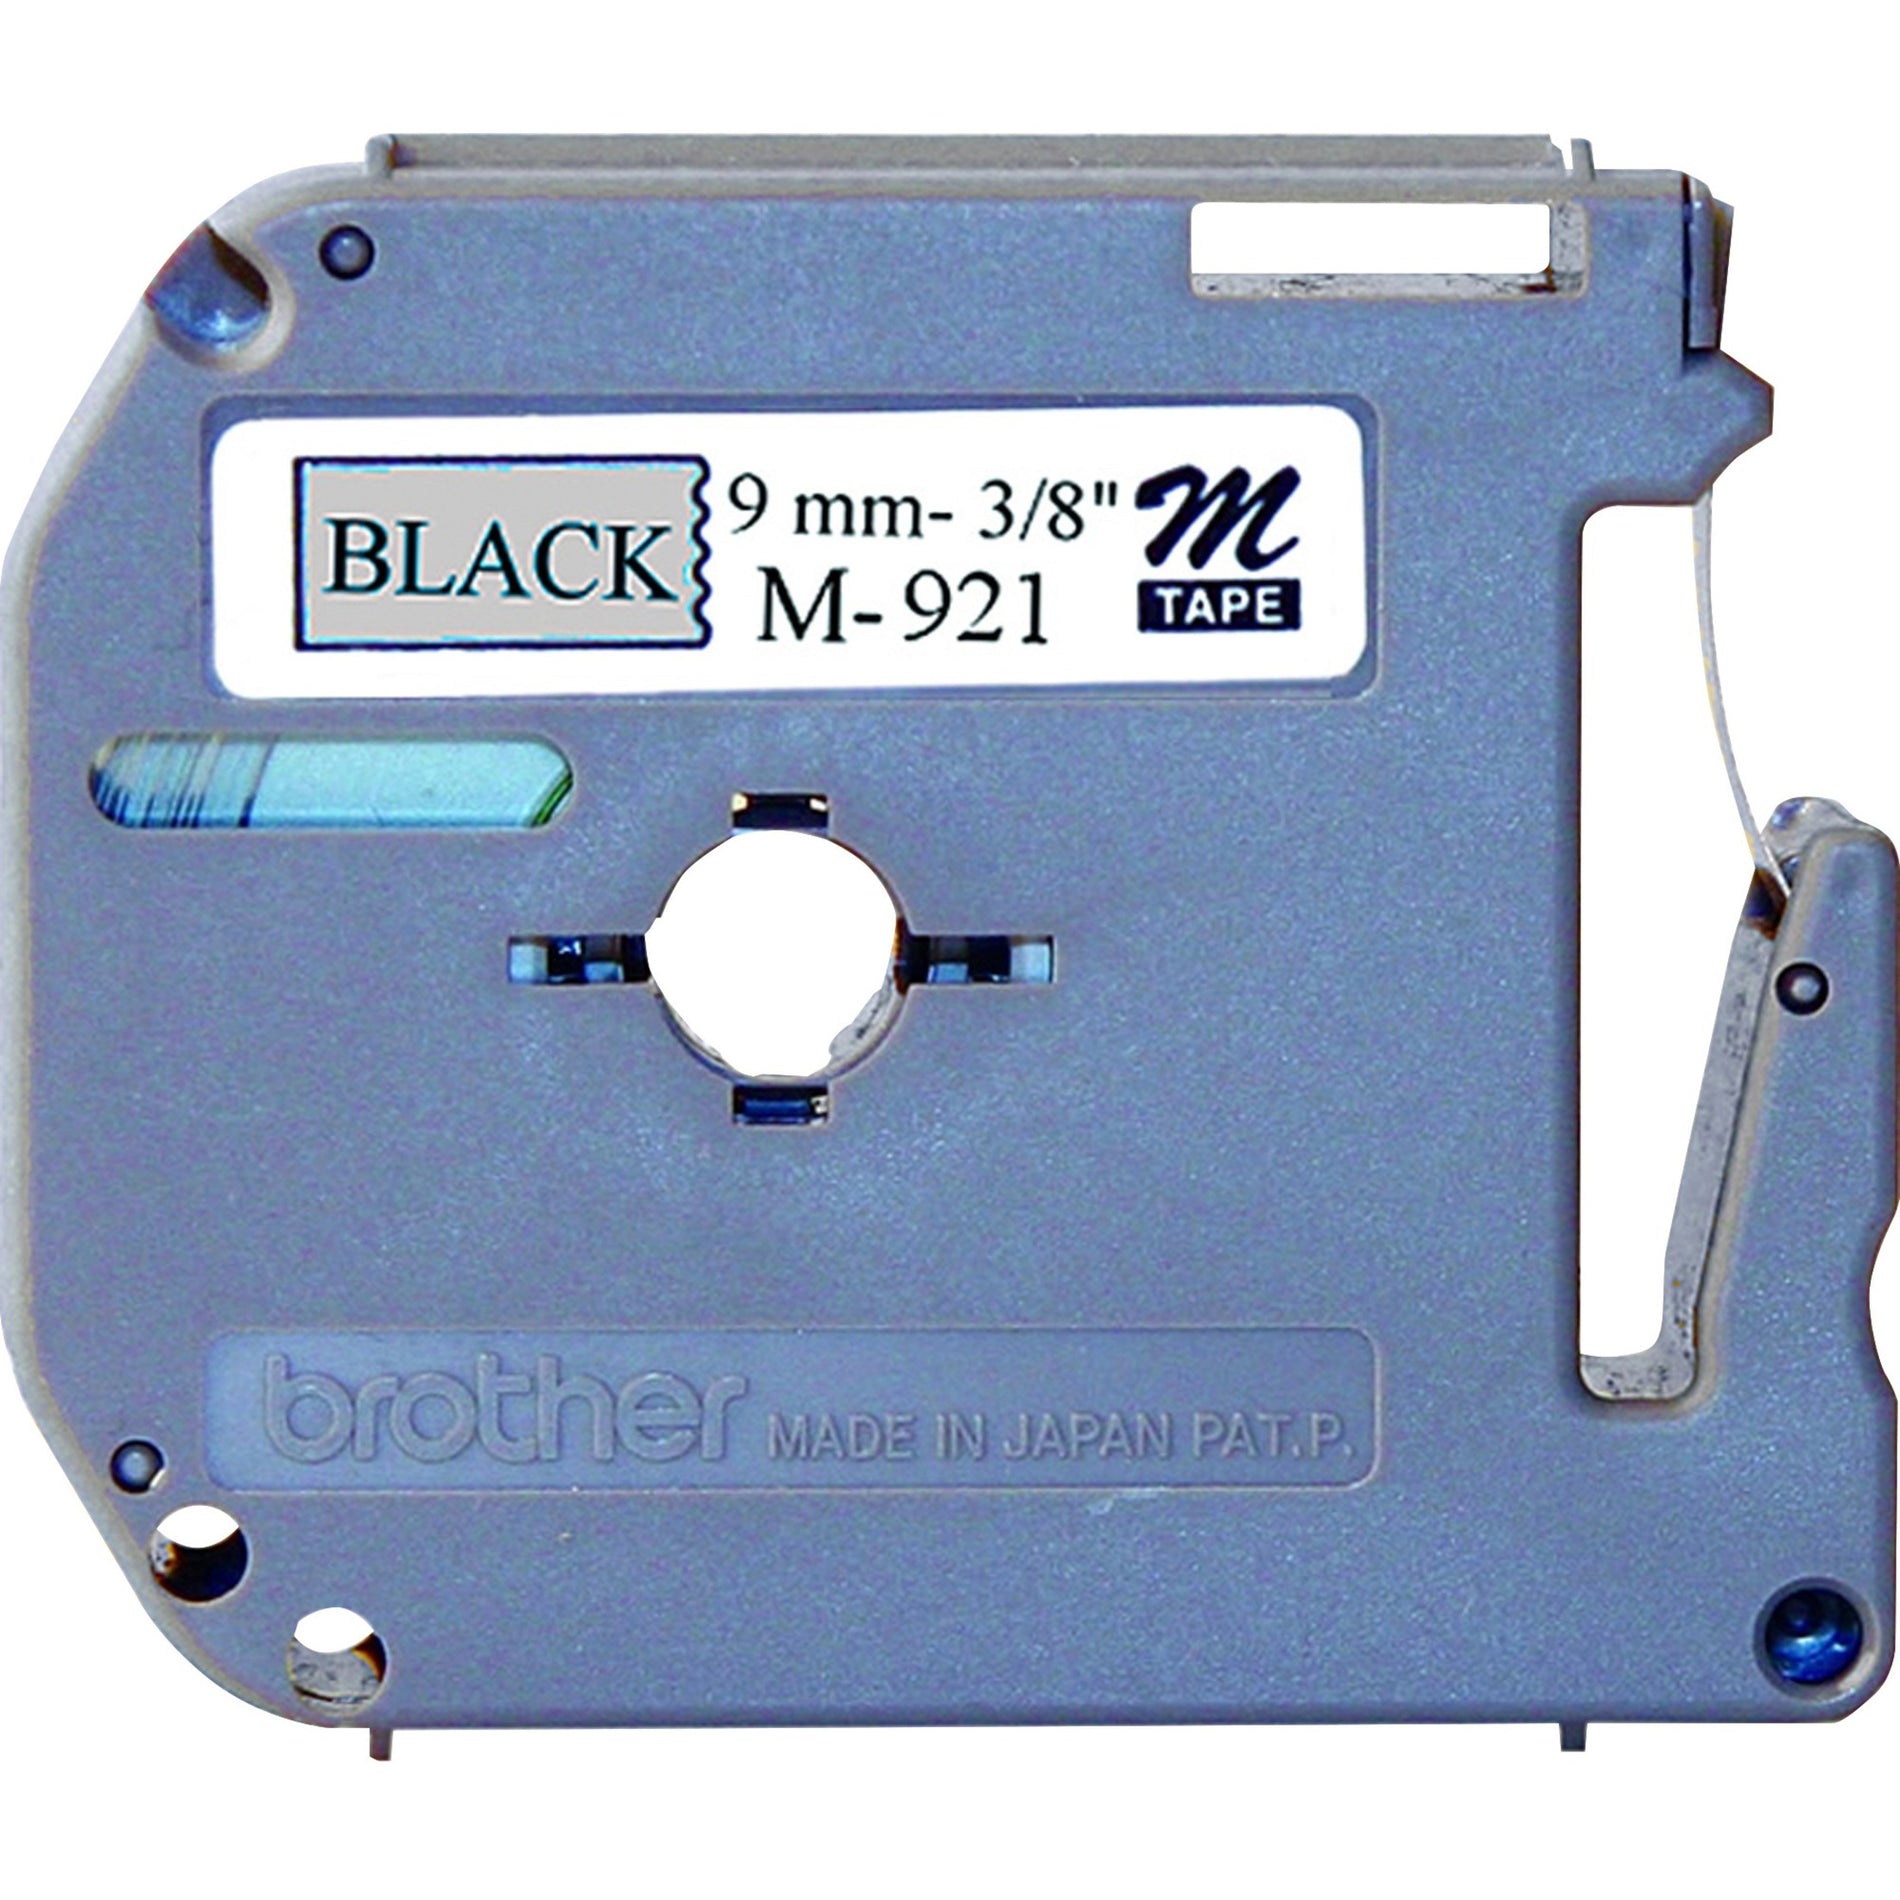 Brother M921 P-touch Nonlaminated Label Tape, 3/8" Size, Black/Silver